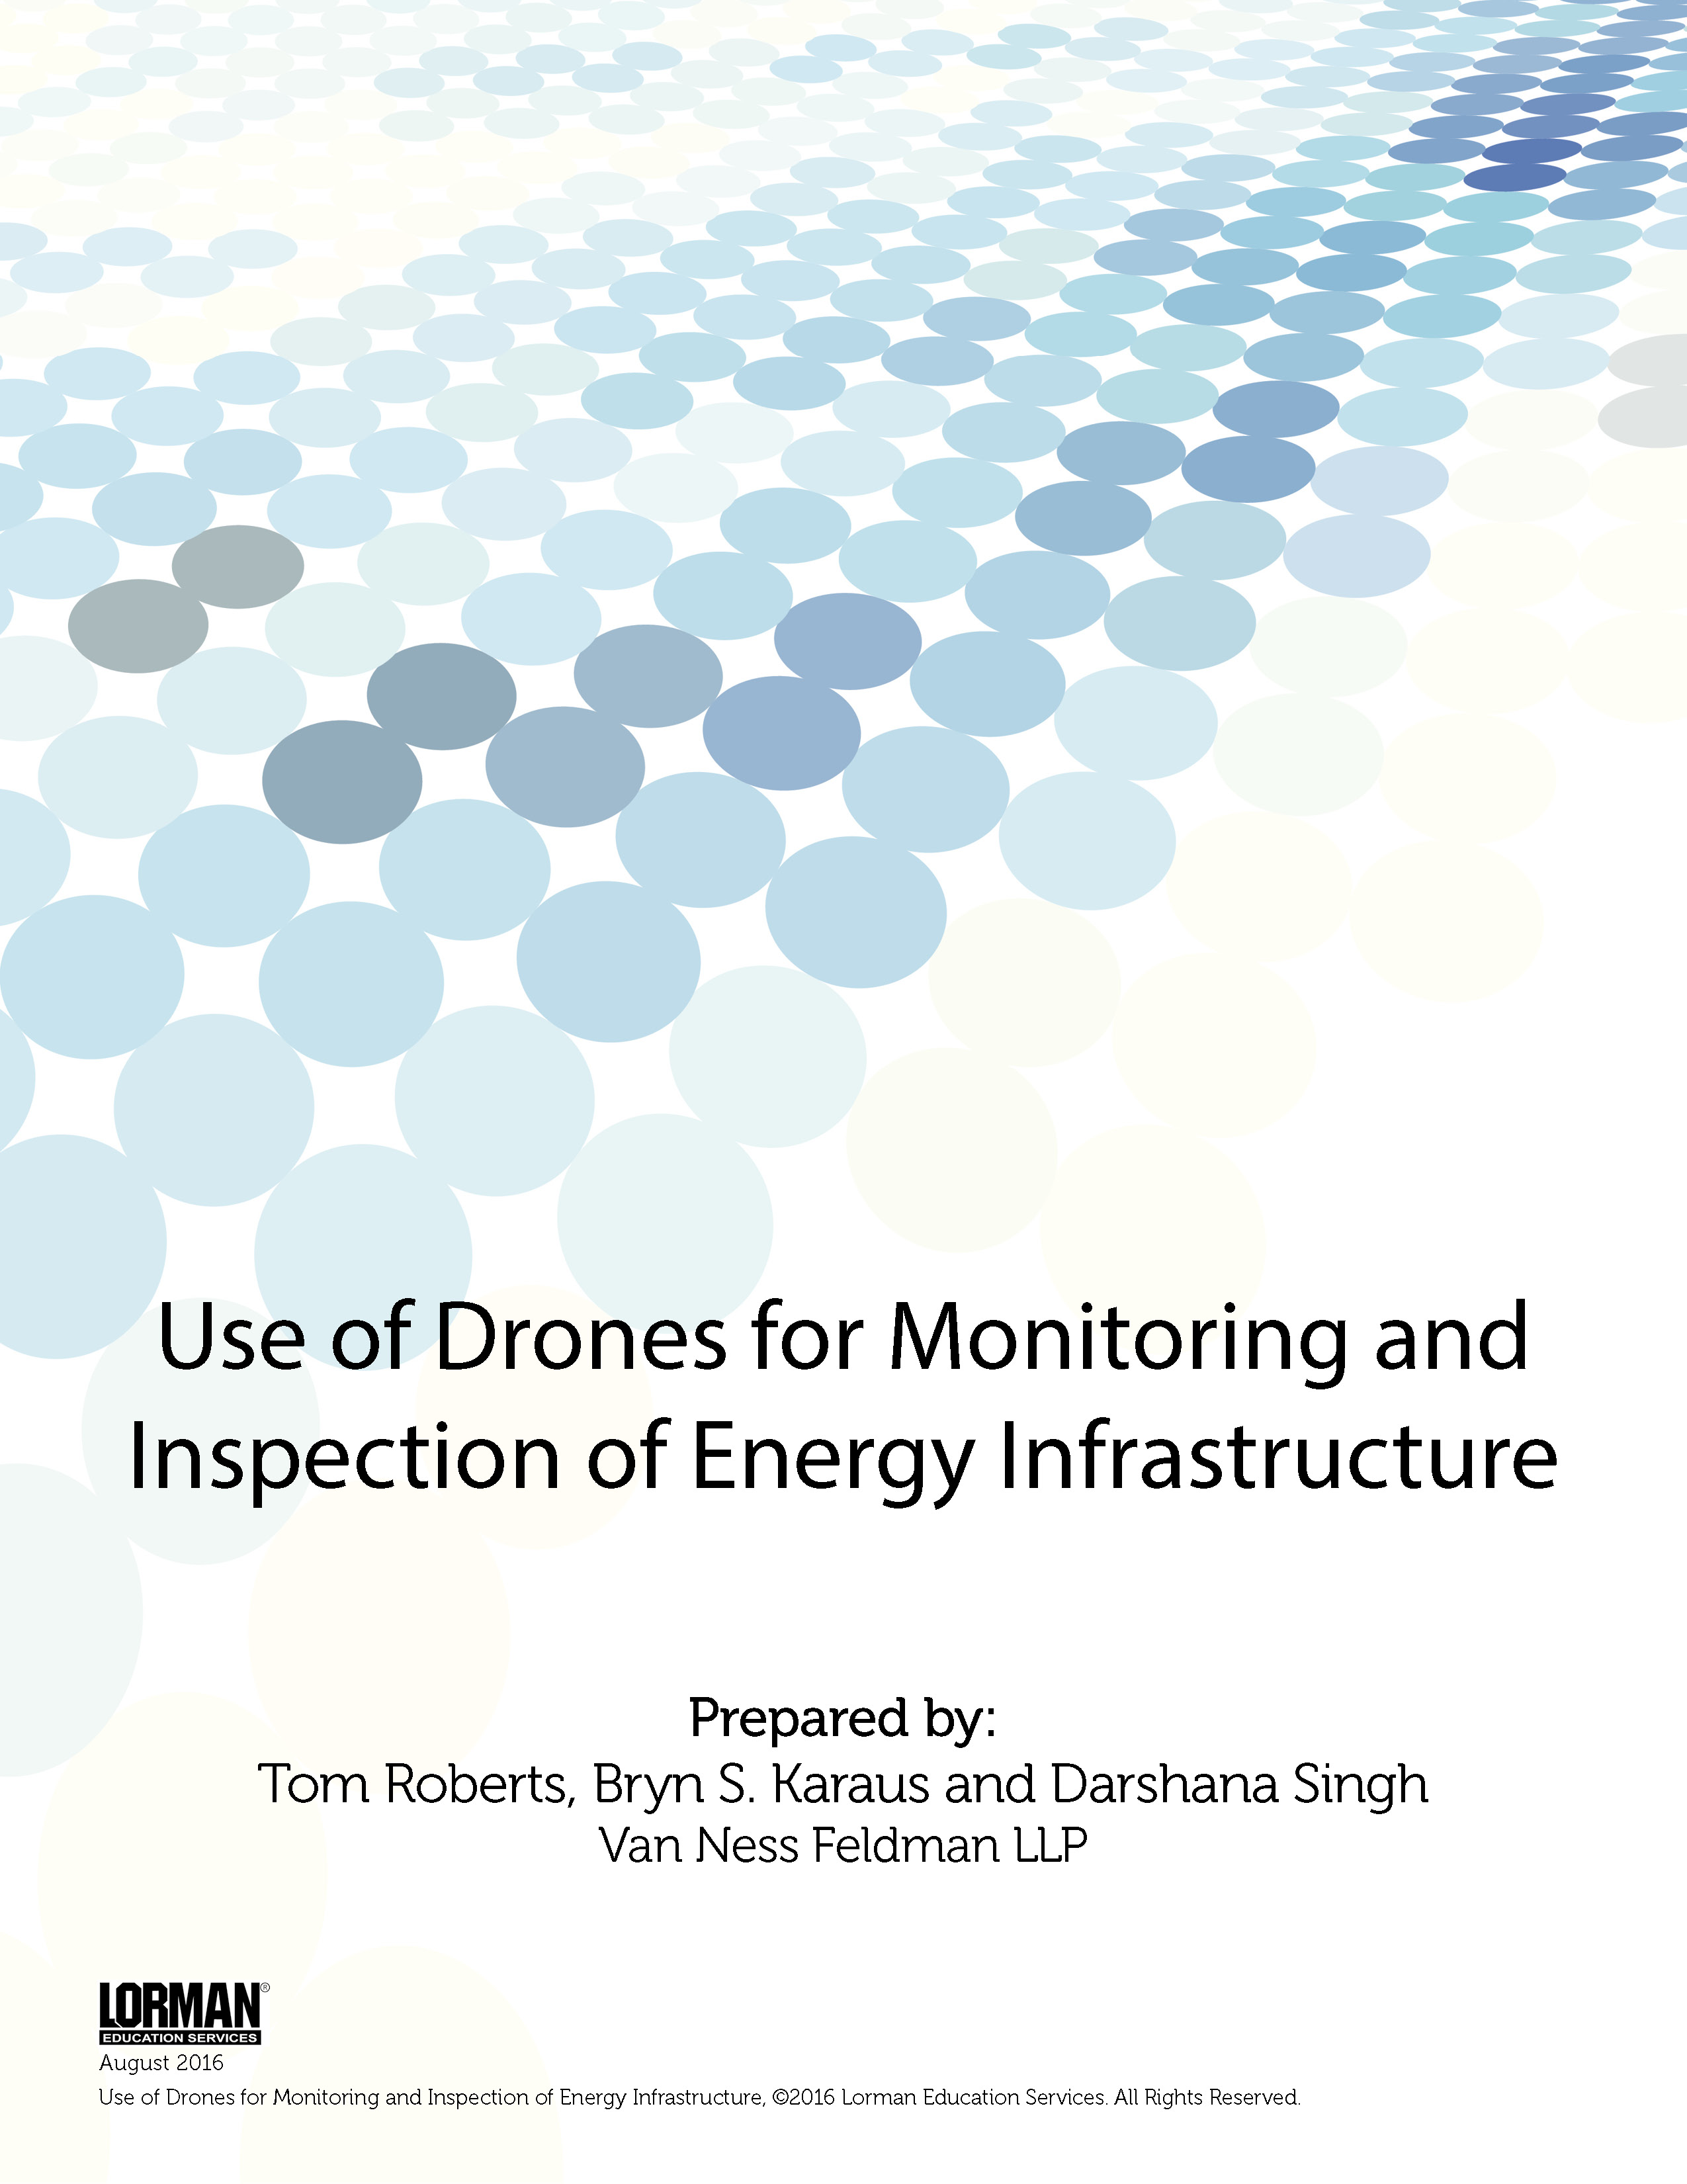 Use of Drones for Monitoring and Inspection of Energy Infrastructure